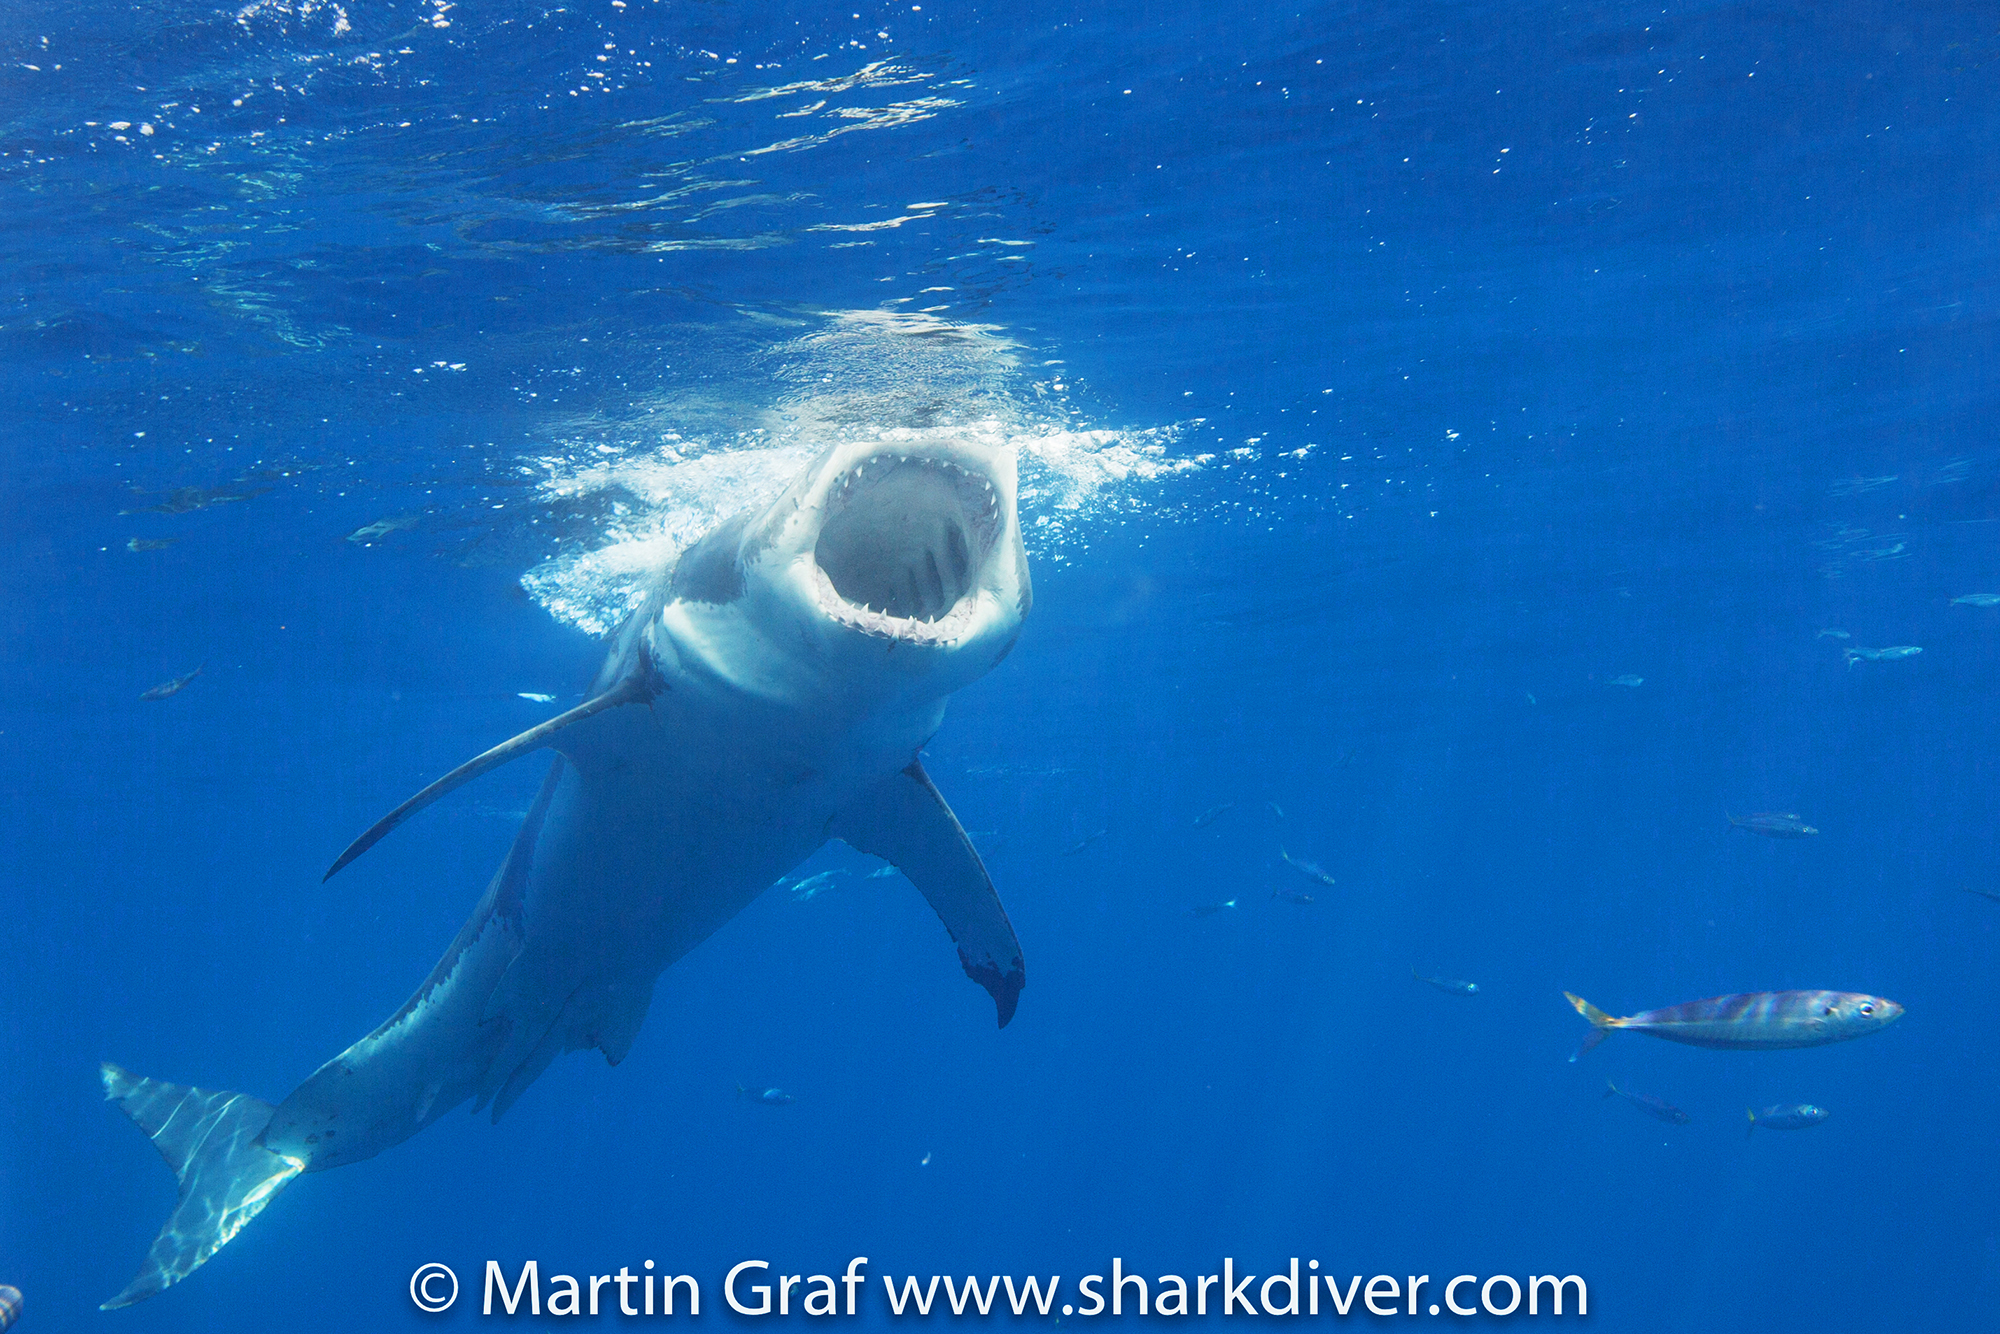 White Shark goes for the bait, Photo by Martin Graf